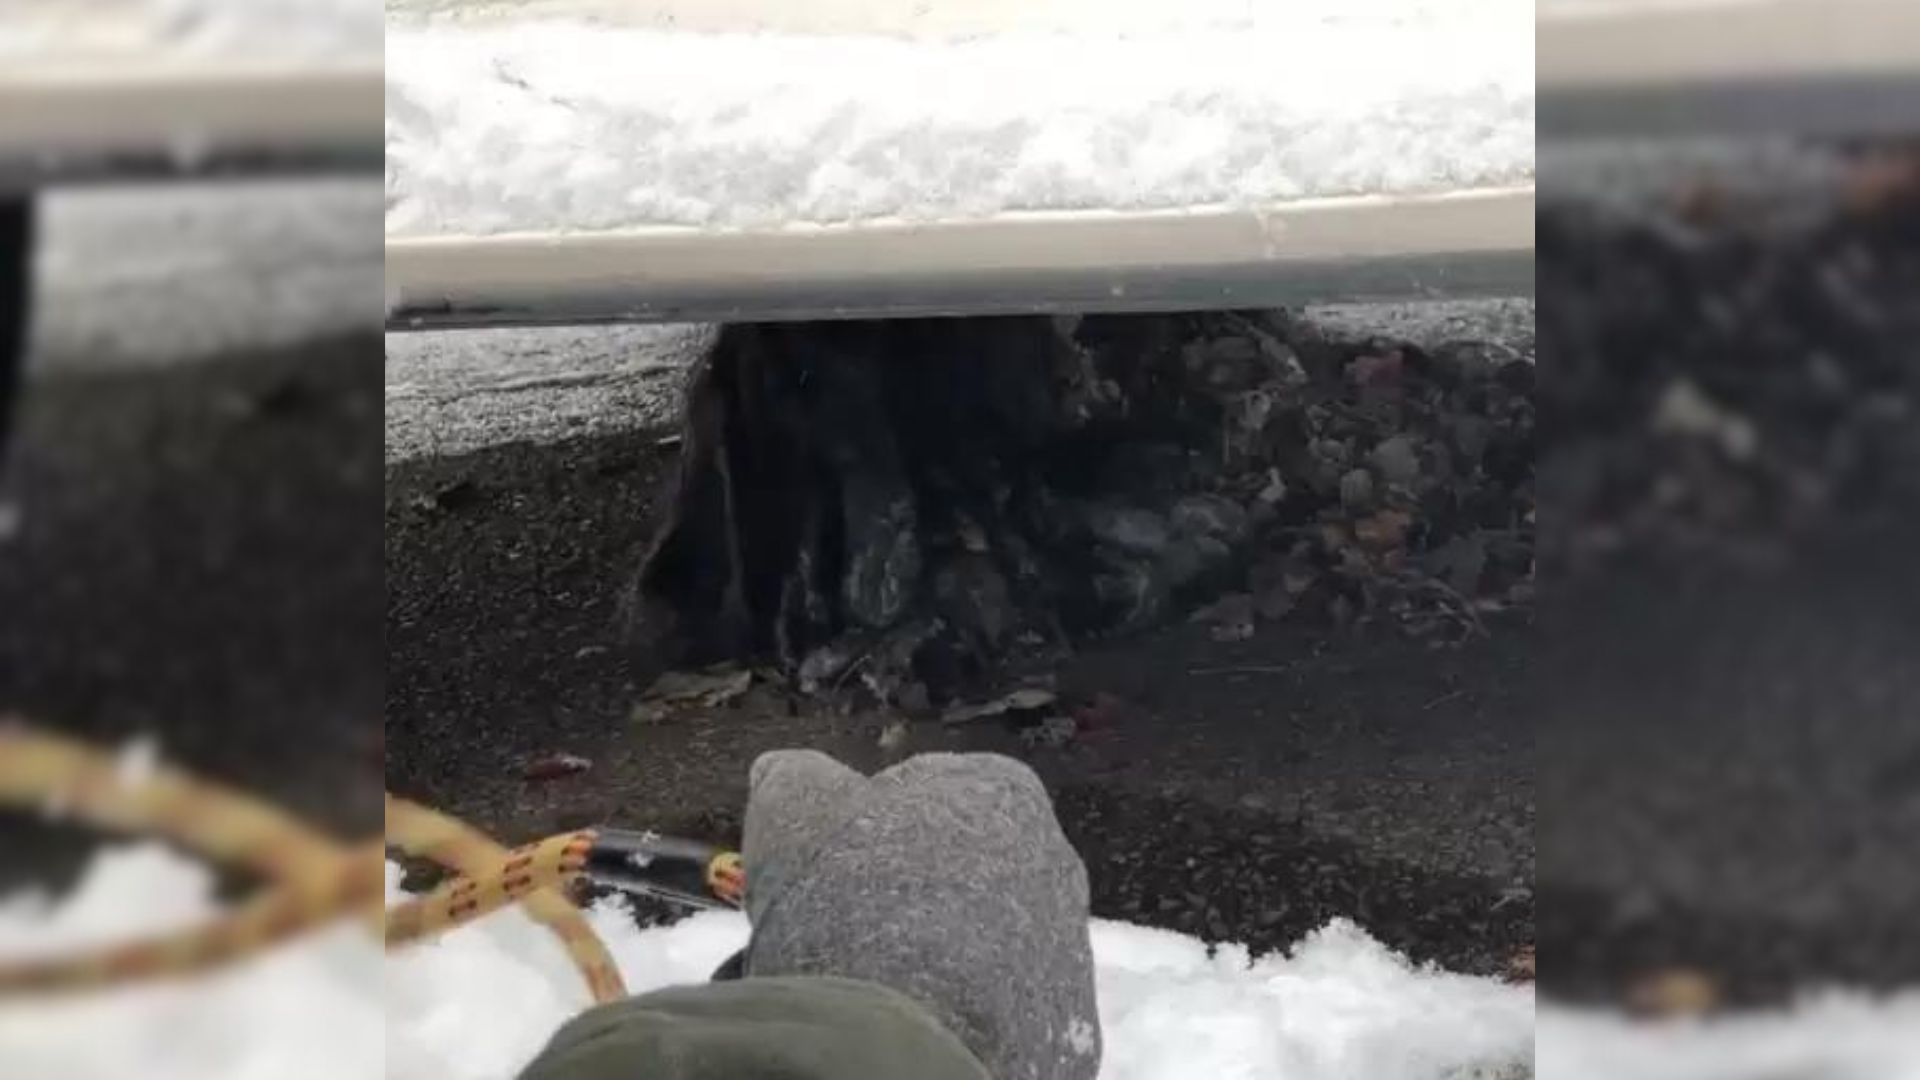 Rescuers Found A Dark Clump On The Ground And Couldn’t Believe What It Really Was